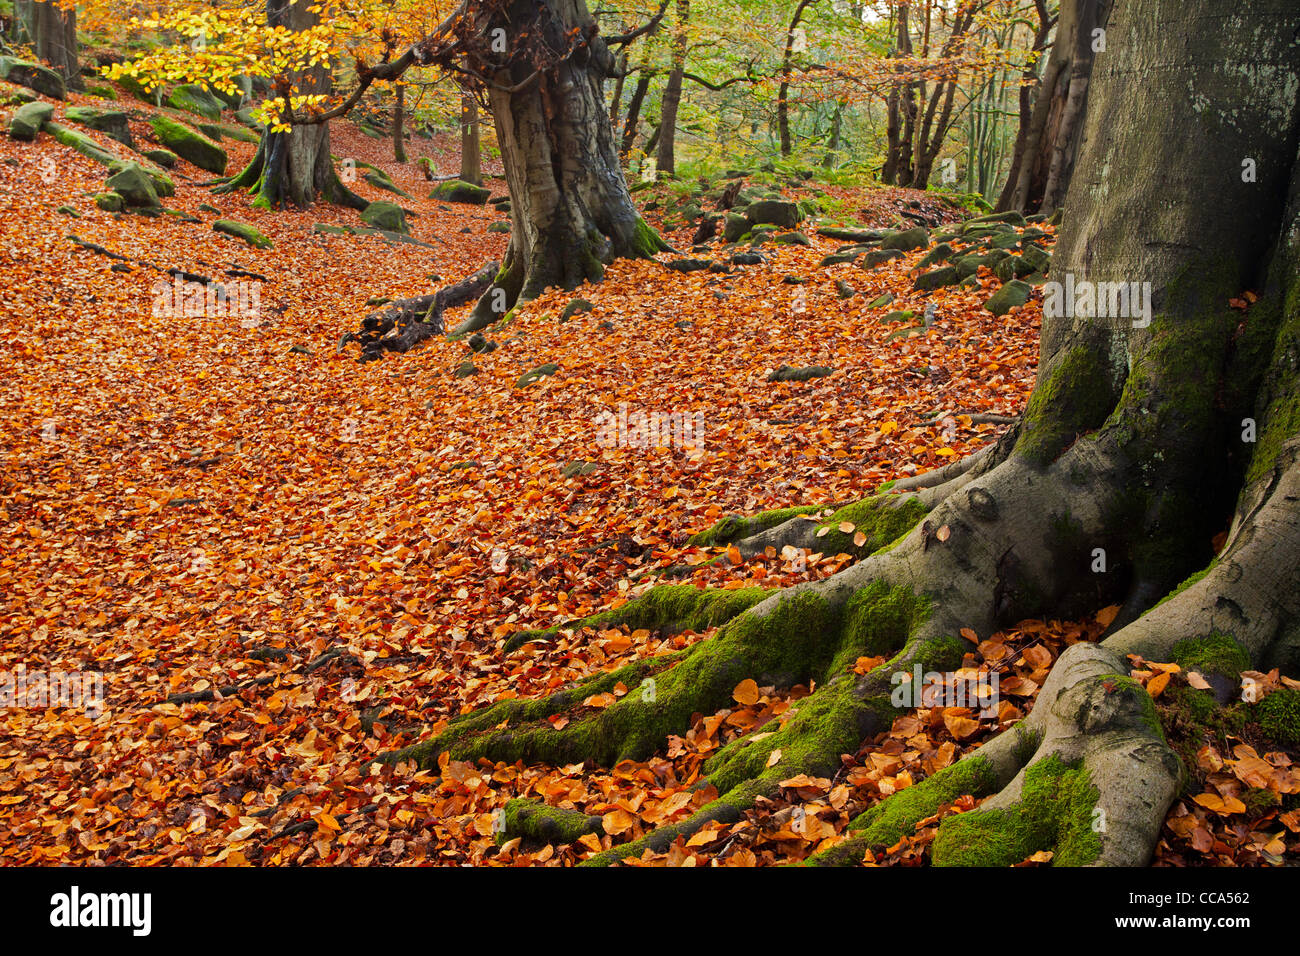 An Autumn morning in the quiet beauty of Padley Gorge, Derbyshire, UK. Stock Photo